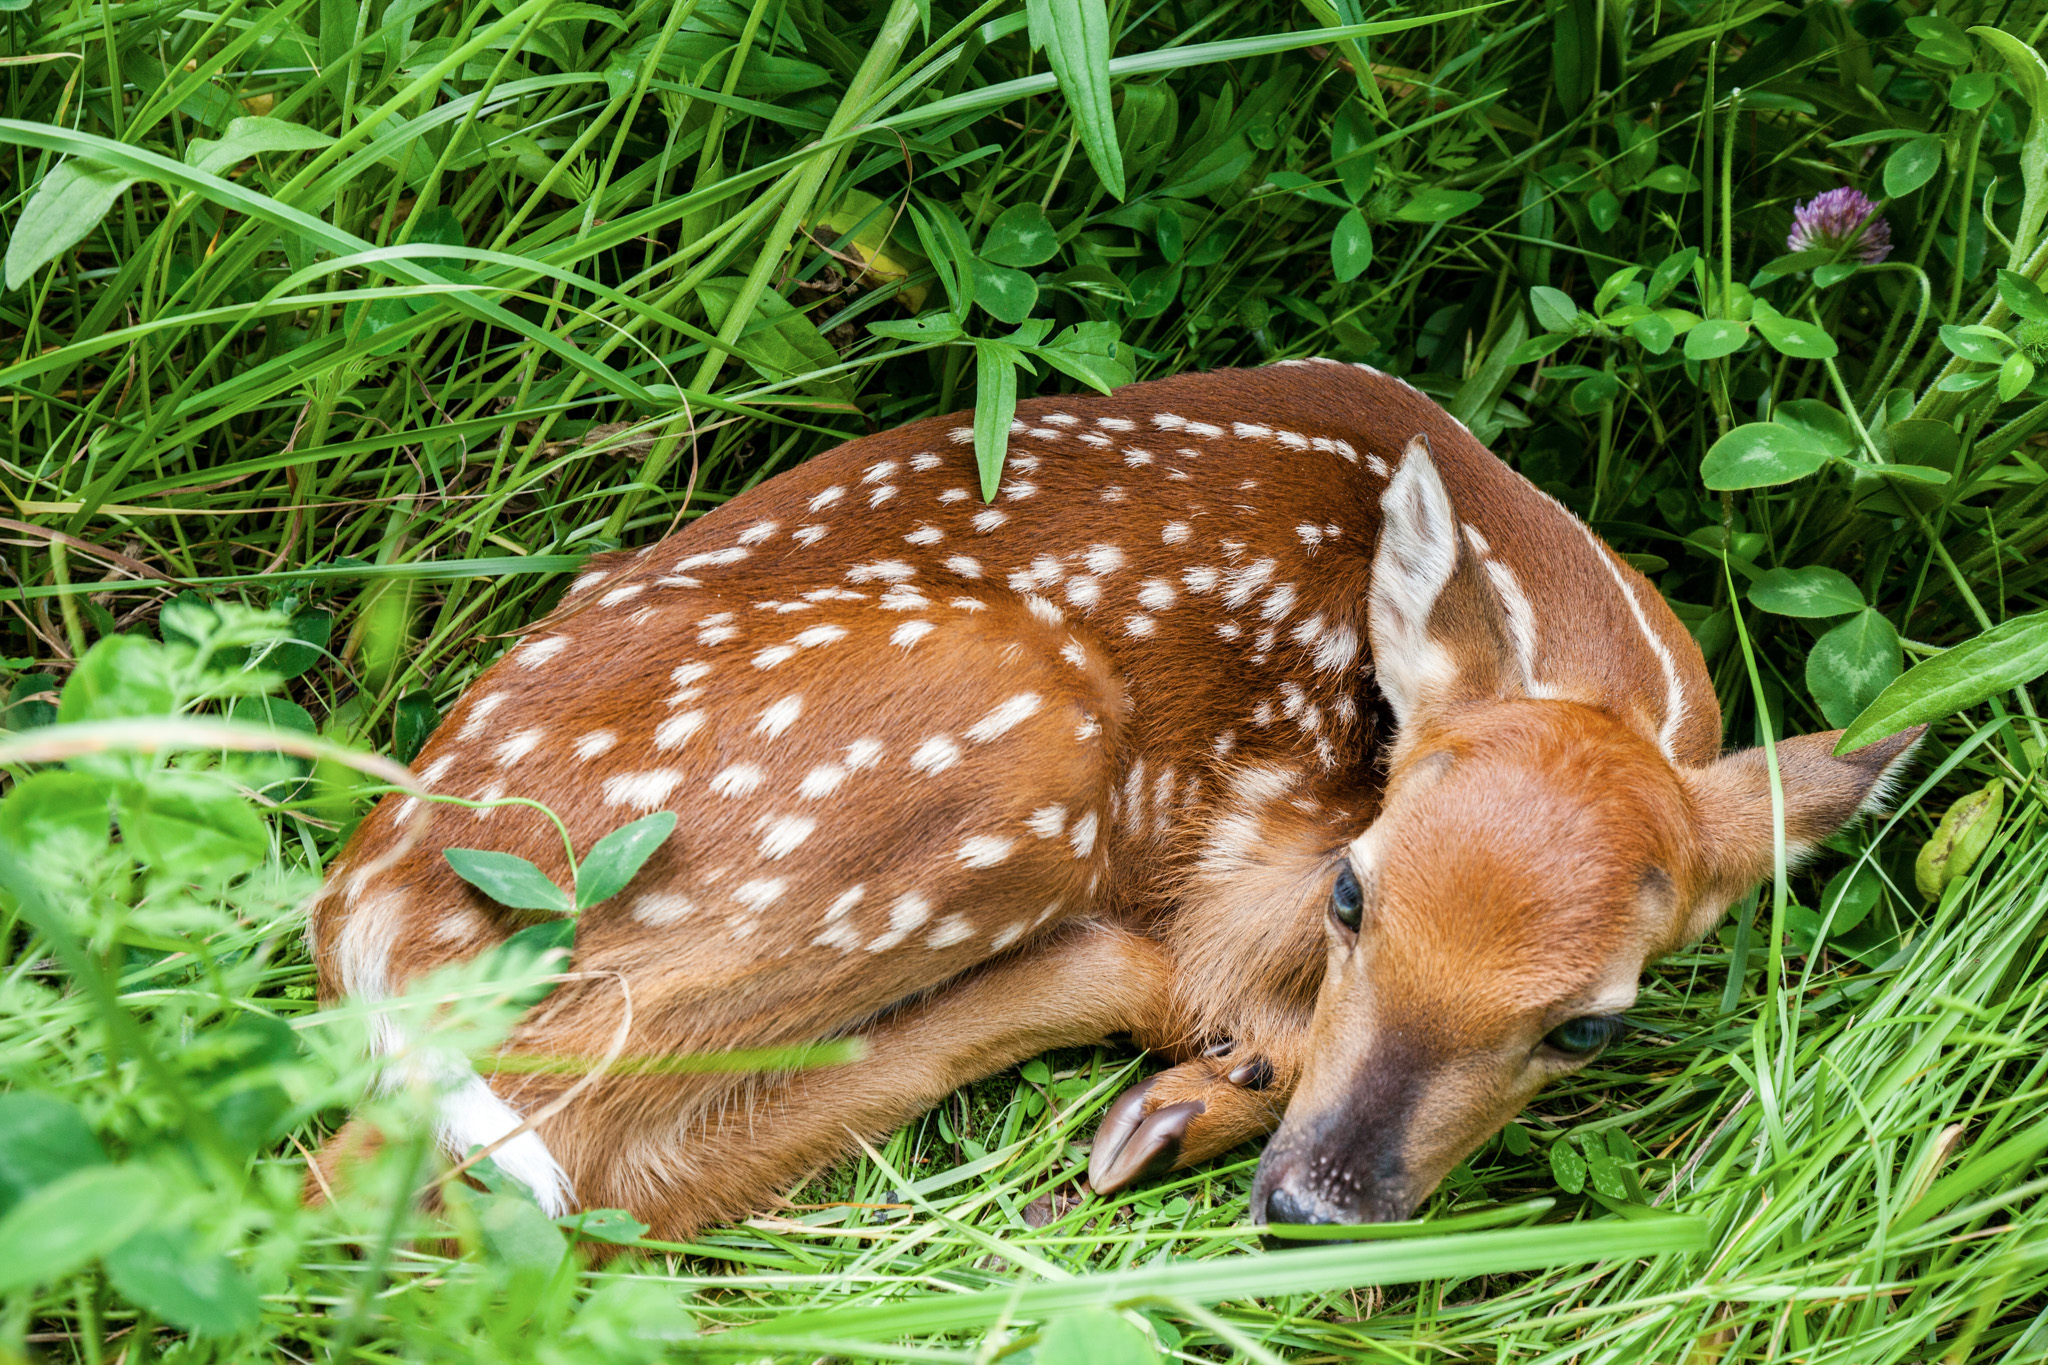 Black bears are often the top predator of whitetail fawns.